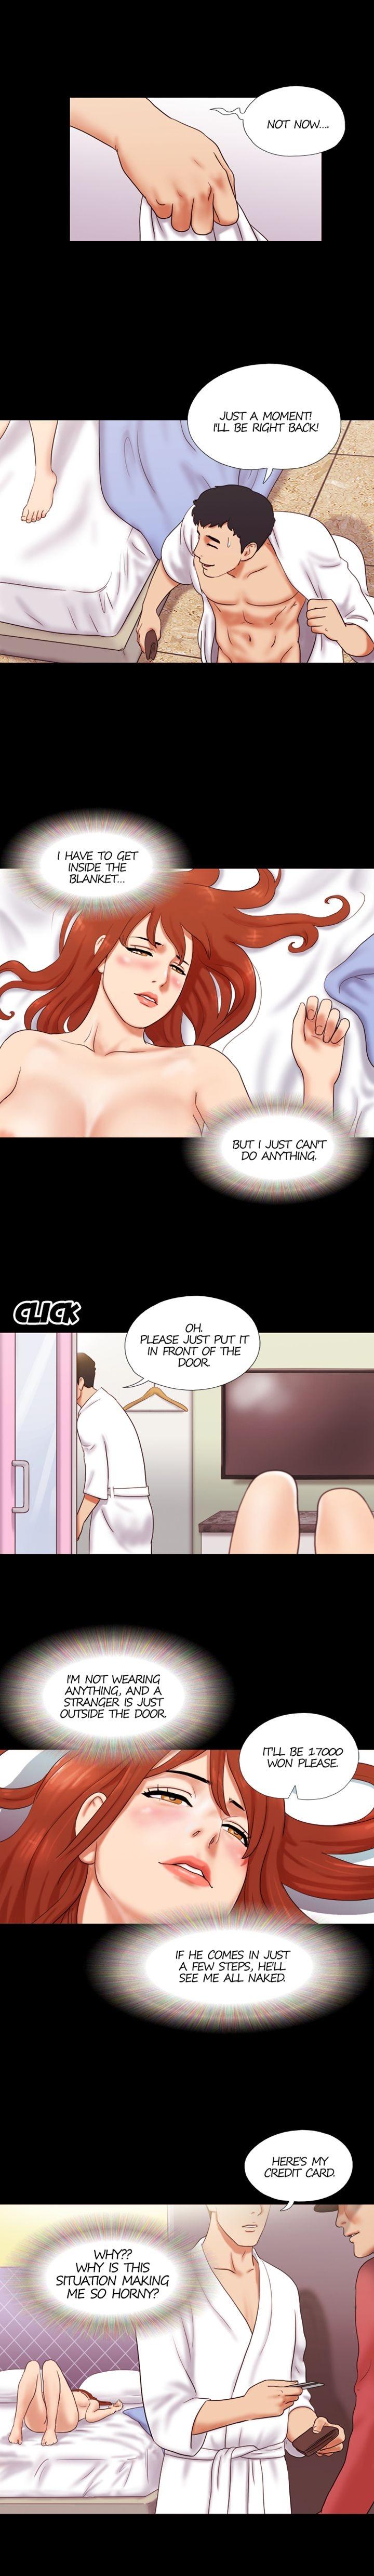 [Mulduck] Couple Game: 17 Sex Fantasies Ver.2 - Ch.01 - 20 [English] 73